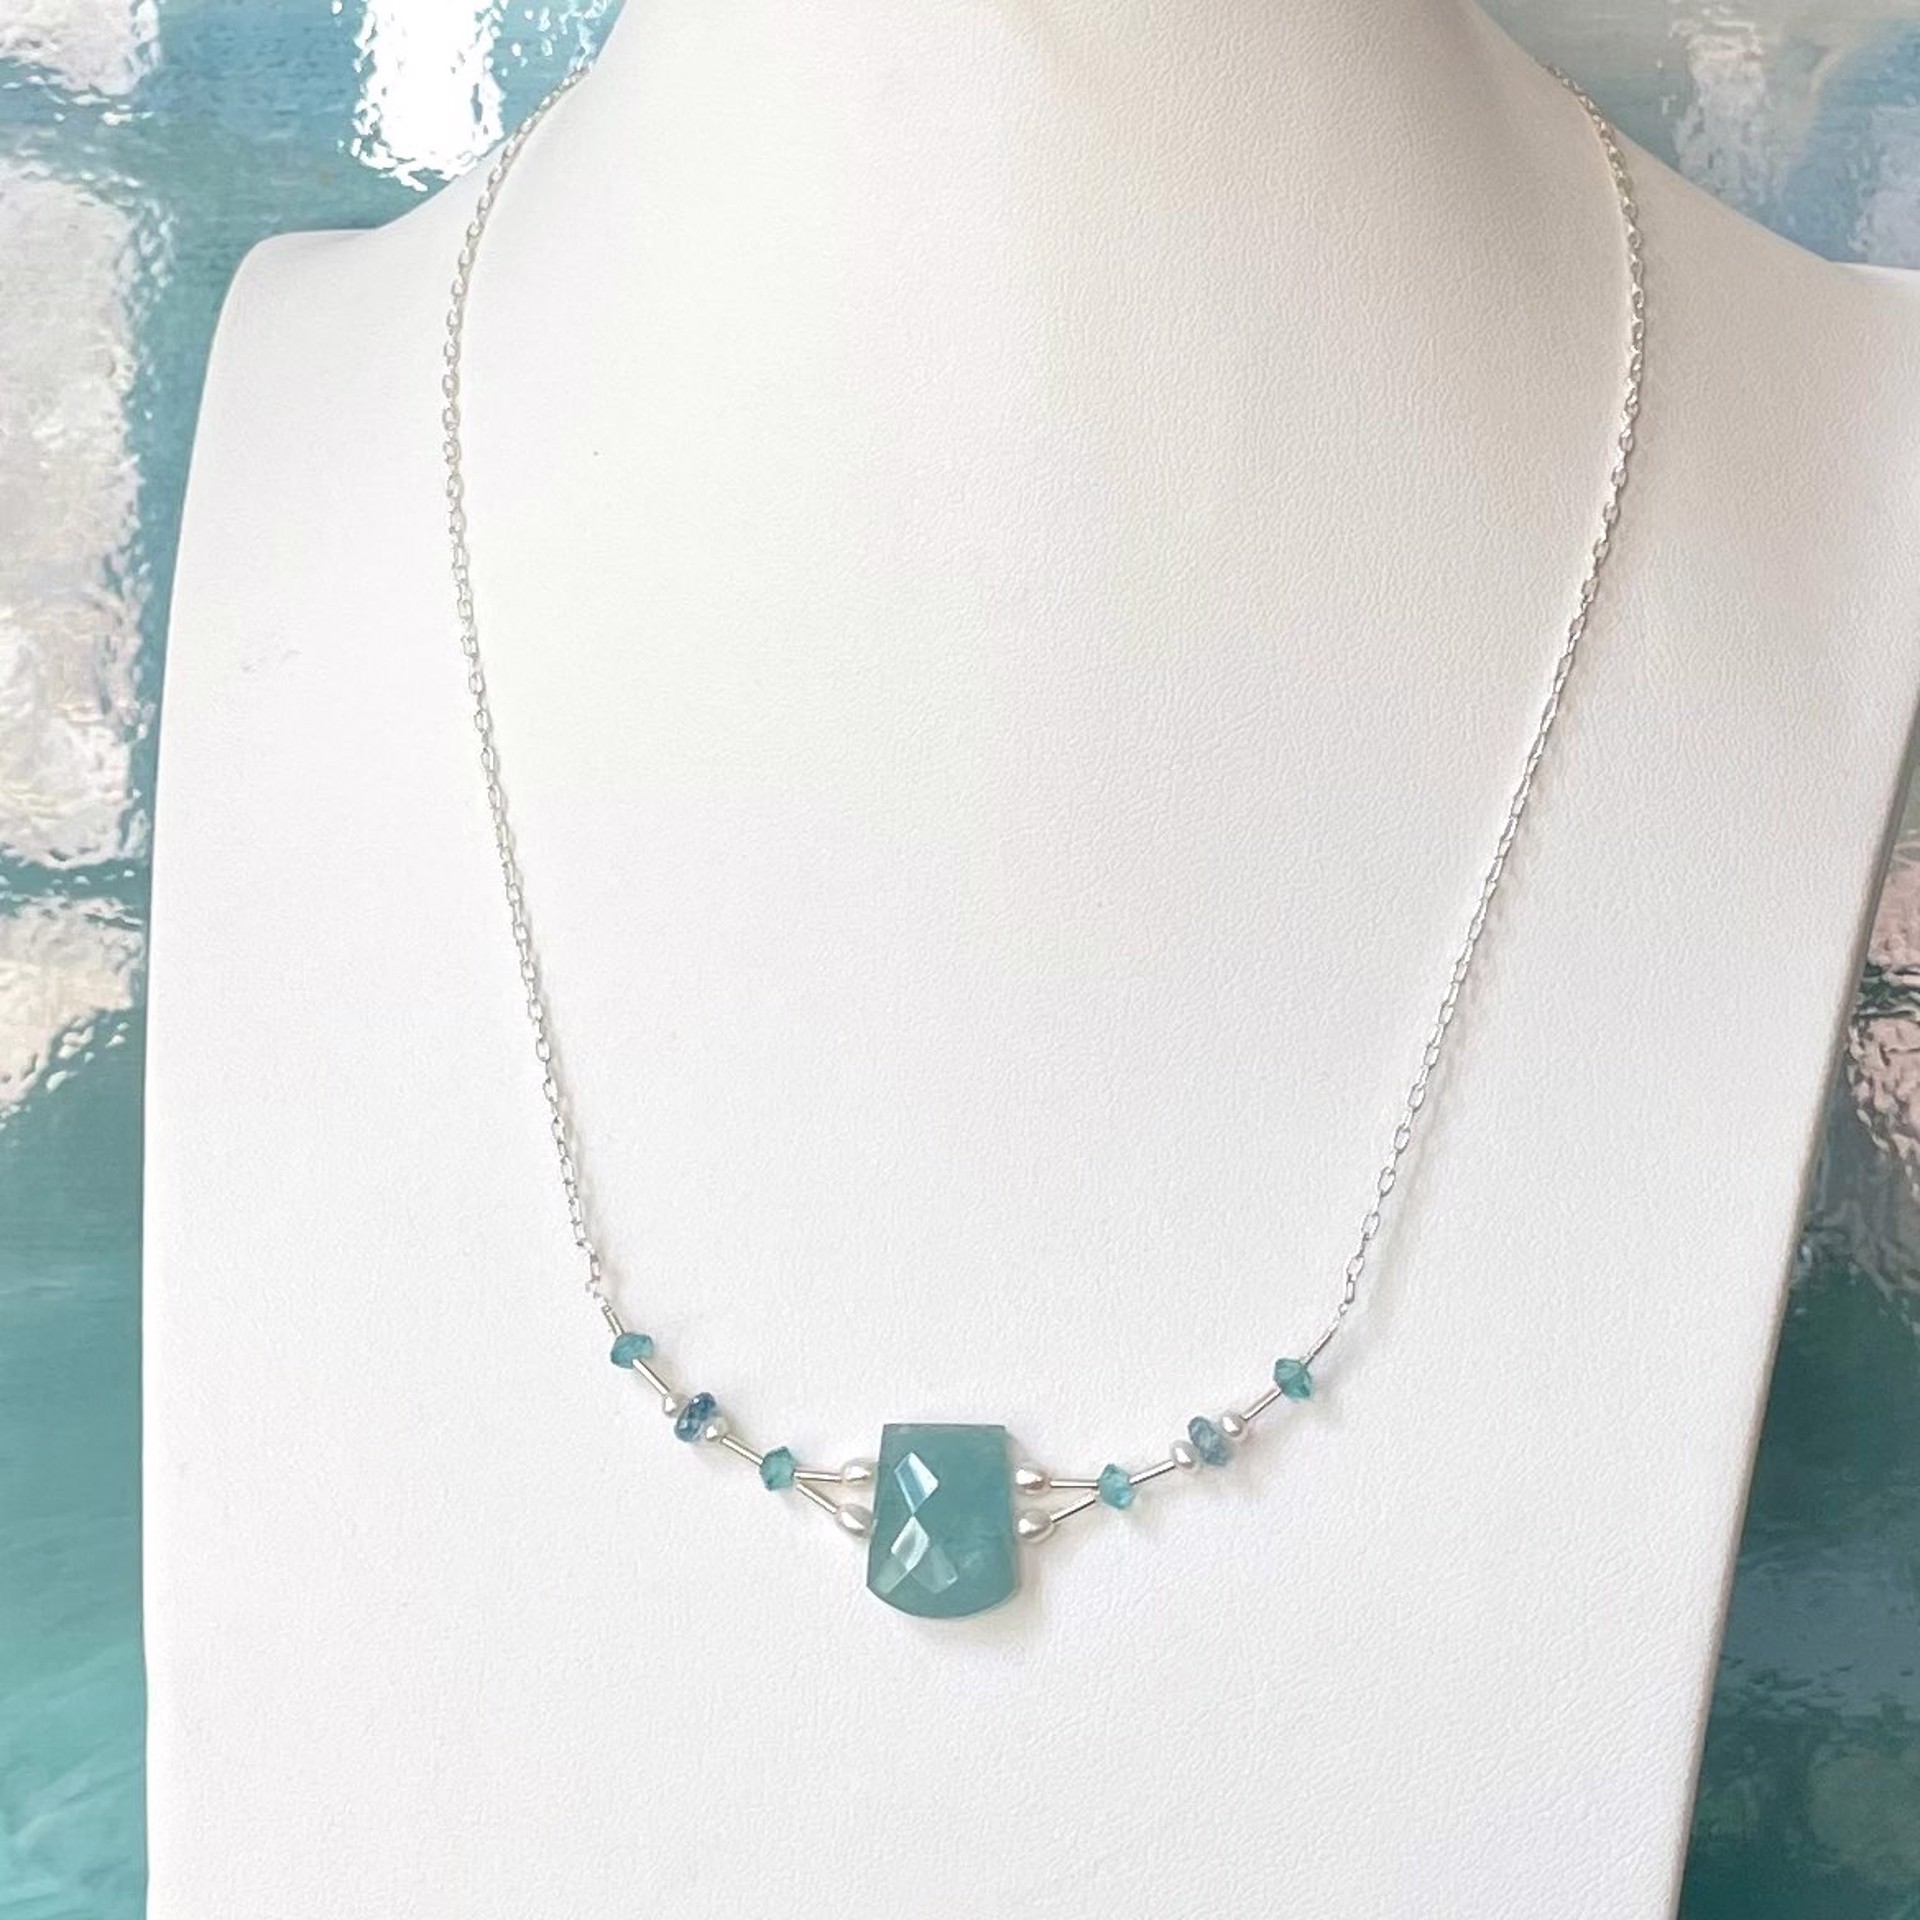 Aquamarine, Apatite, Pearls and Sterling Silver Double Drilled Shield Necklace by Lisa Kelley